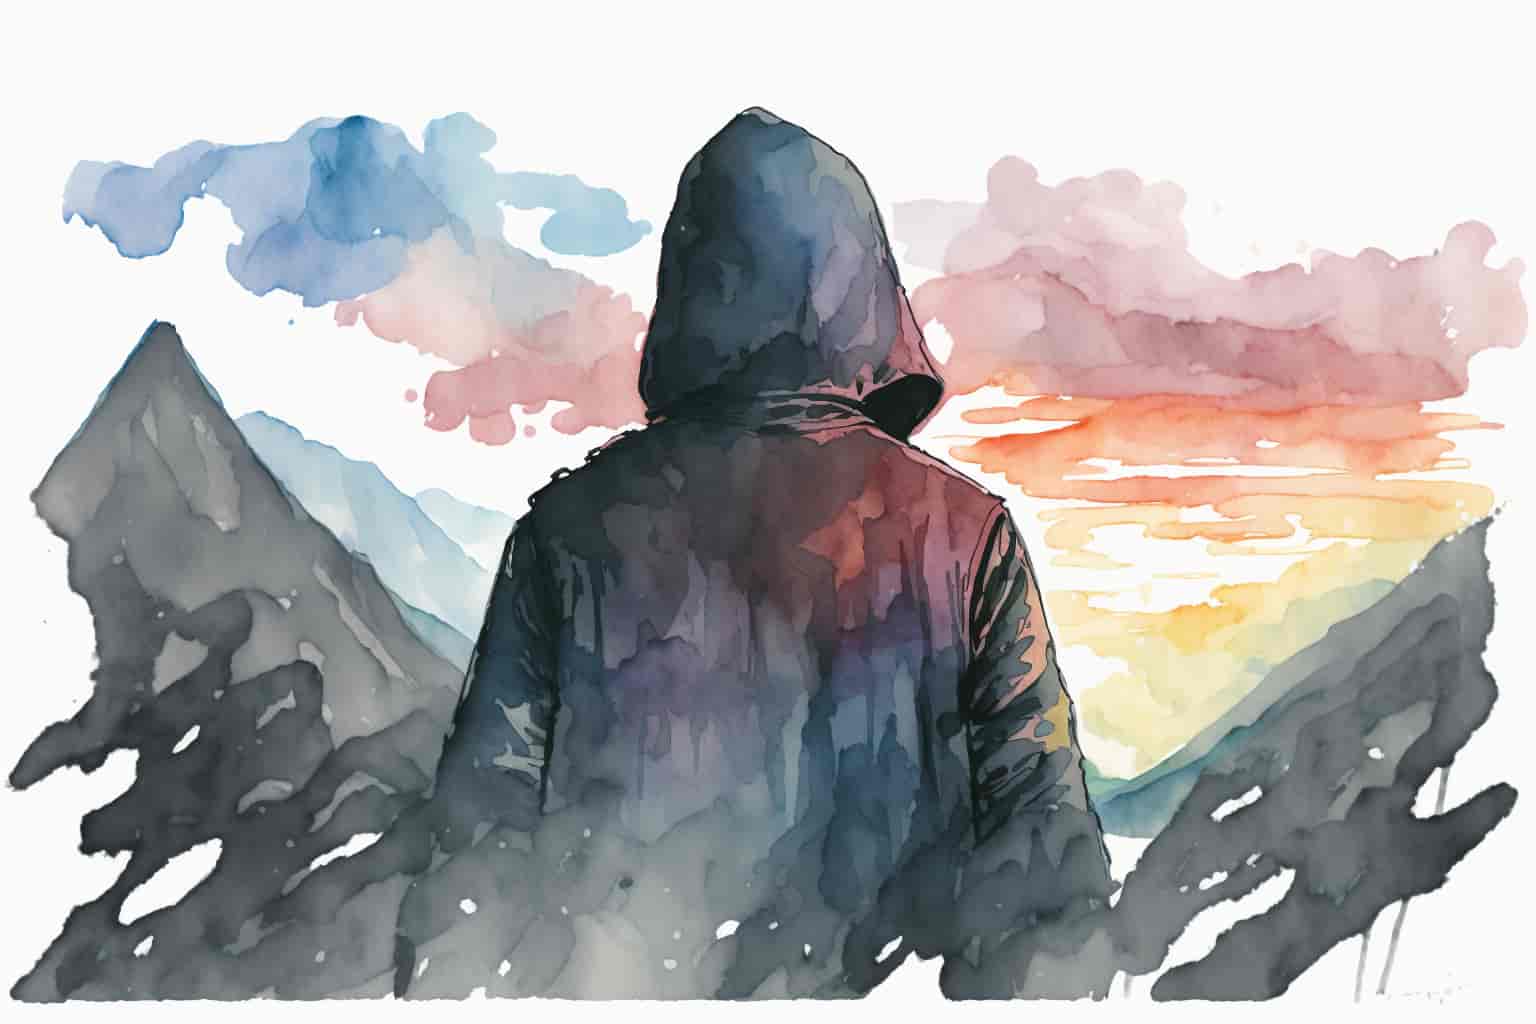 abstract watercolor illustration of a hooded person in fog with mountains in the background